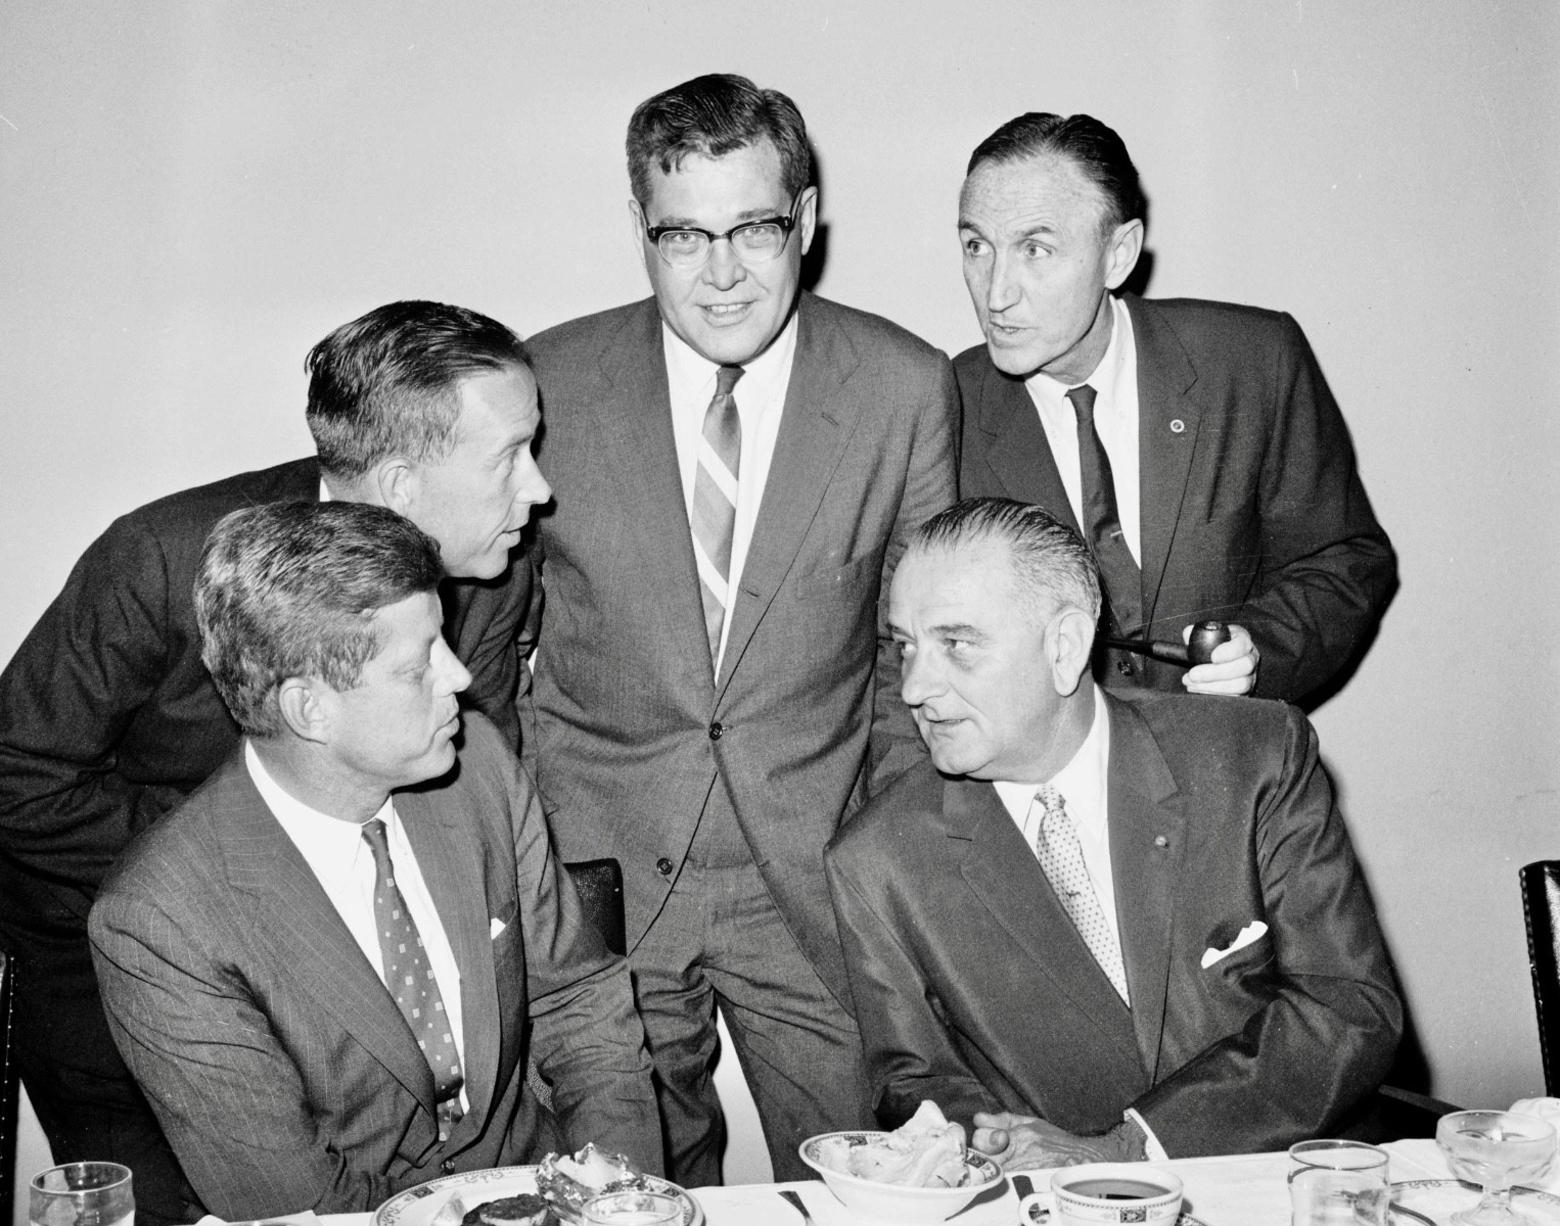 U.S. Rep. Lee Metcalf of Montana (standing, center) meets with Senate Democratic leaders in the U.S. Senate during a meal  in August 1960 prior to the fall 1960 state and national elections. Pictured are (left to right)  1960 Democratic presidential candidate Senator John F. Kennedy; Senator Henry M. Jackson, National  Democratic Party Chairman; Metcalf; Senate Majority Leader Lyndon B. Johnson; and Senate Assistant  Majority Leader Mike Mansfield, August 1960  U.S. Senate Democratic Photograph Studio photograph/courtesy Montana Historical Society